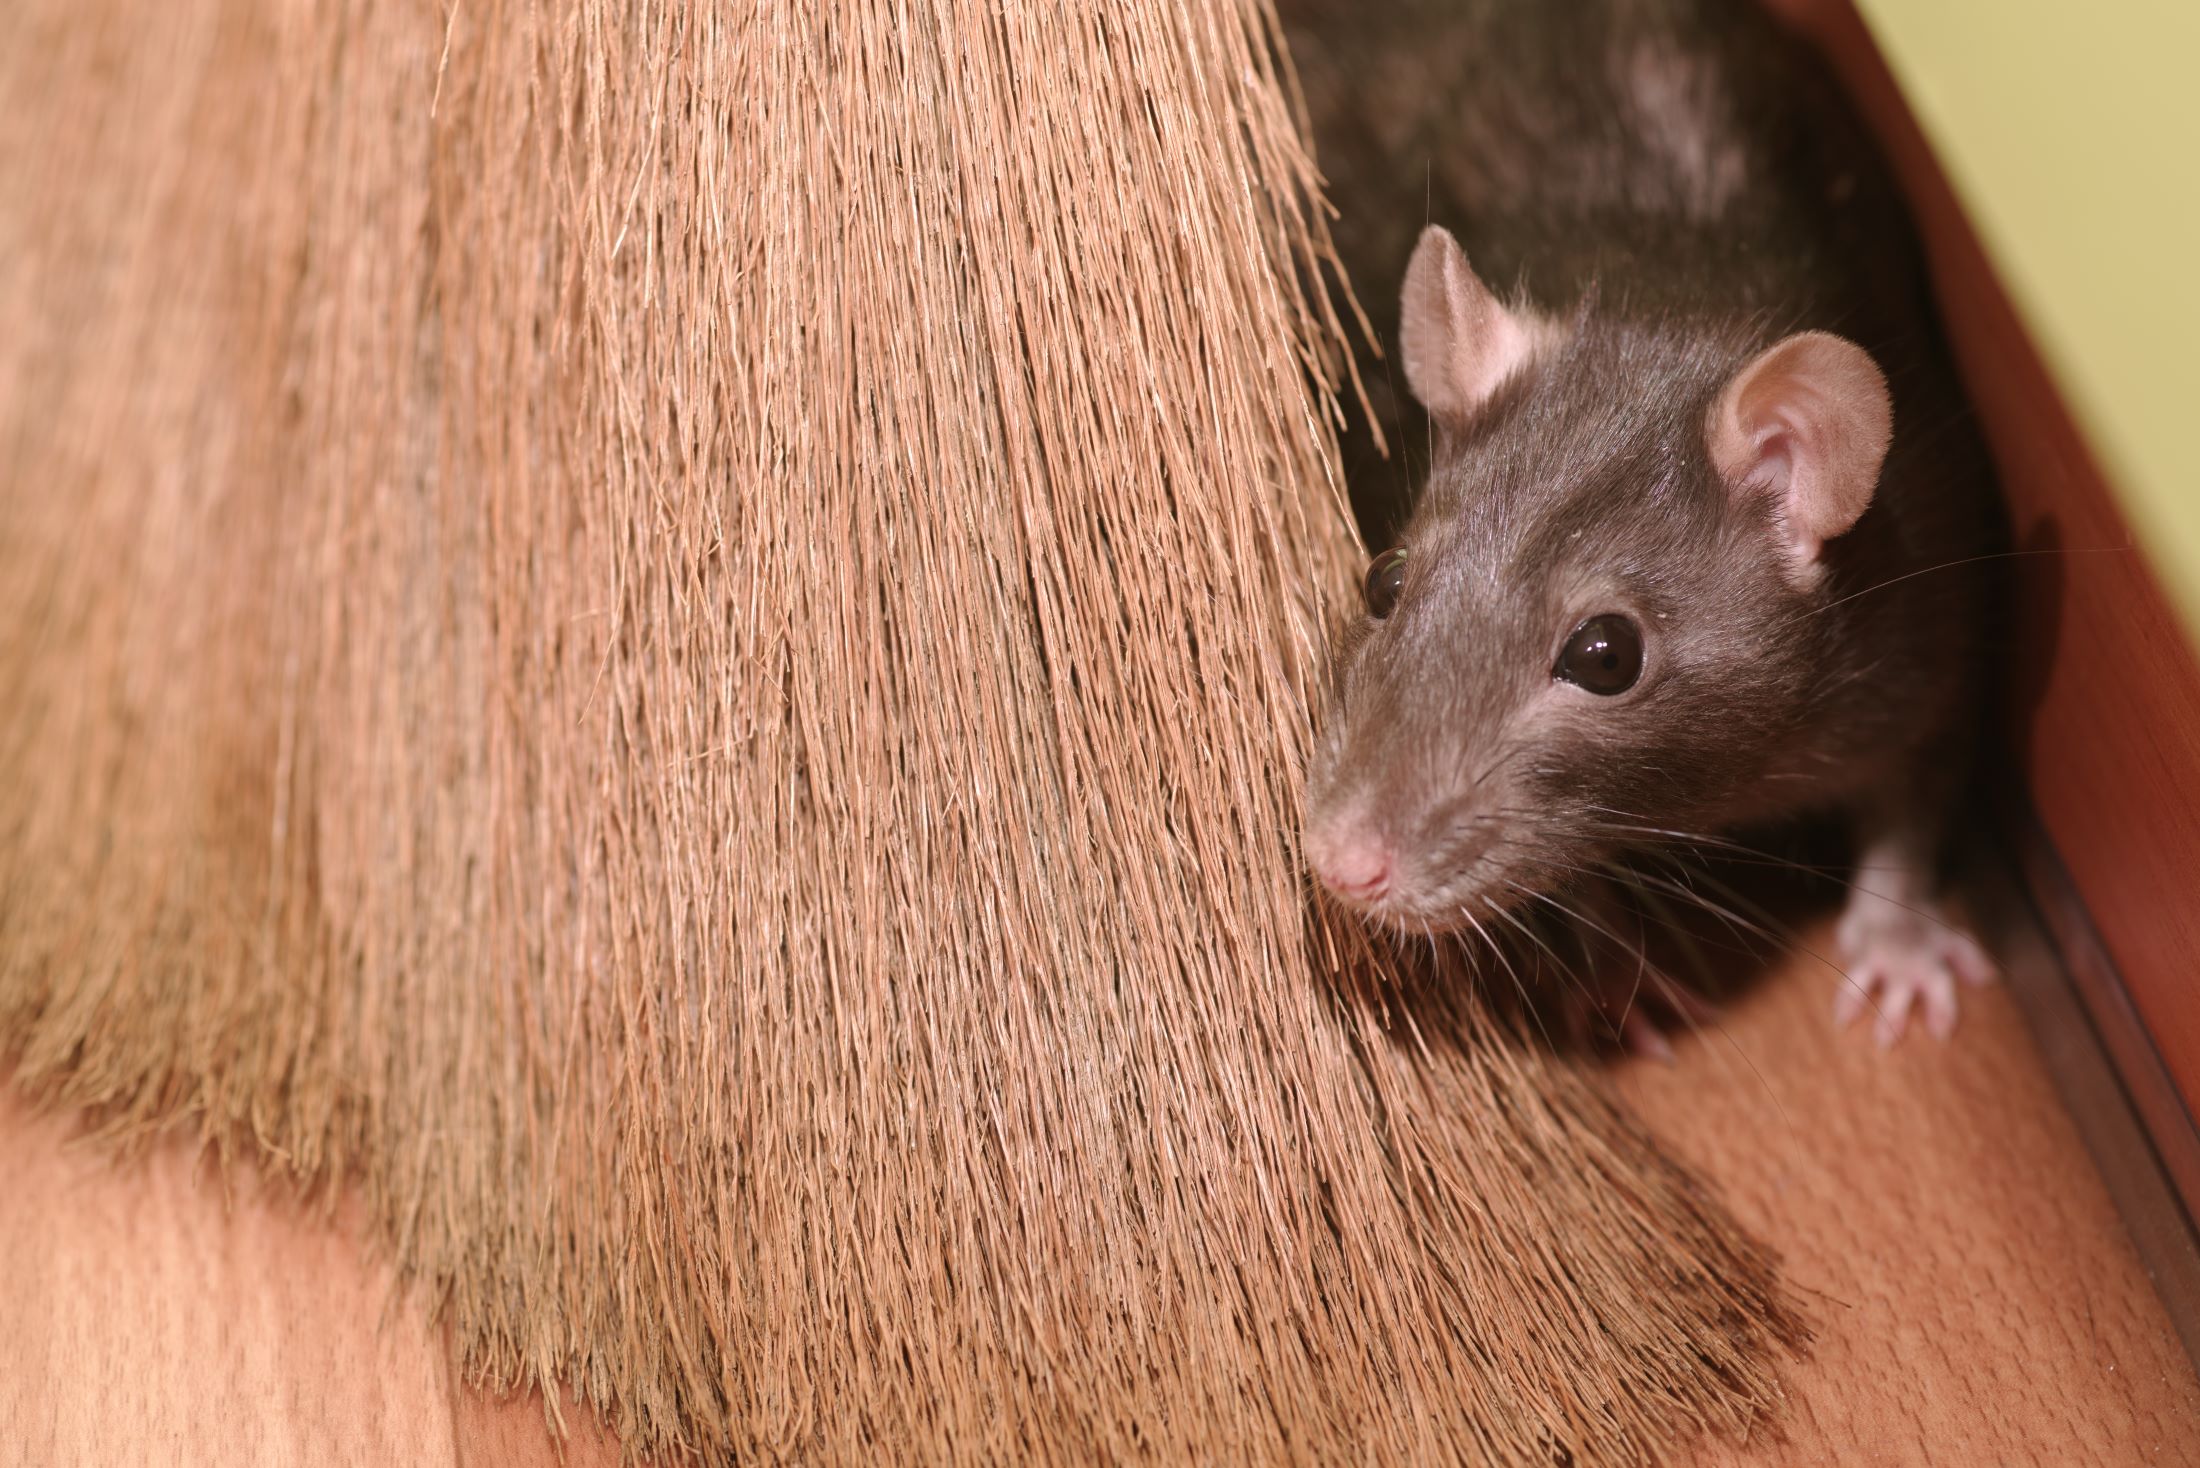 7 Signs You Have a Mouse or Rat in Your Home - 7 Signs You Have a Mouse or Rat in Your Home